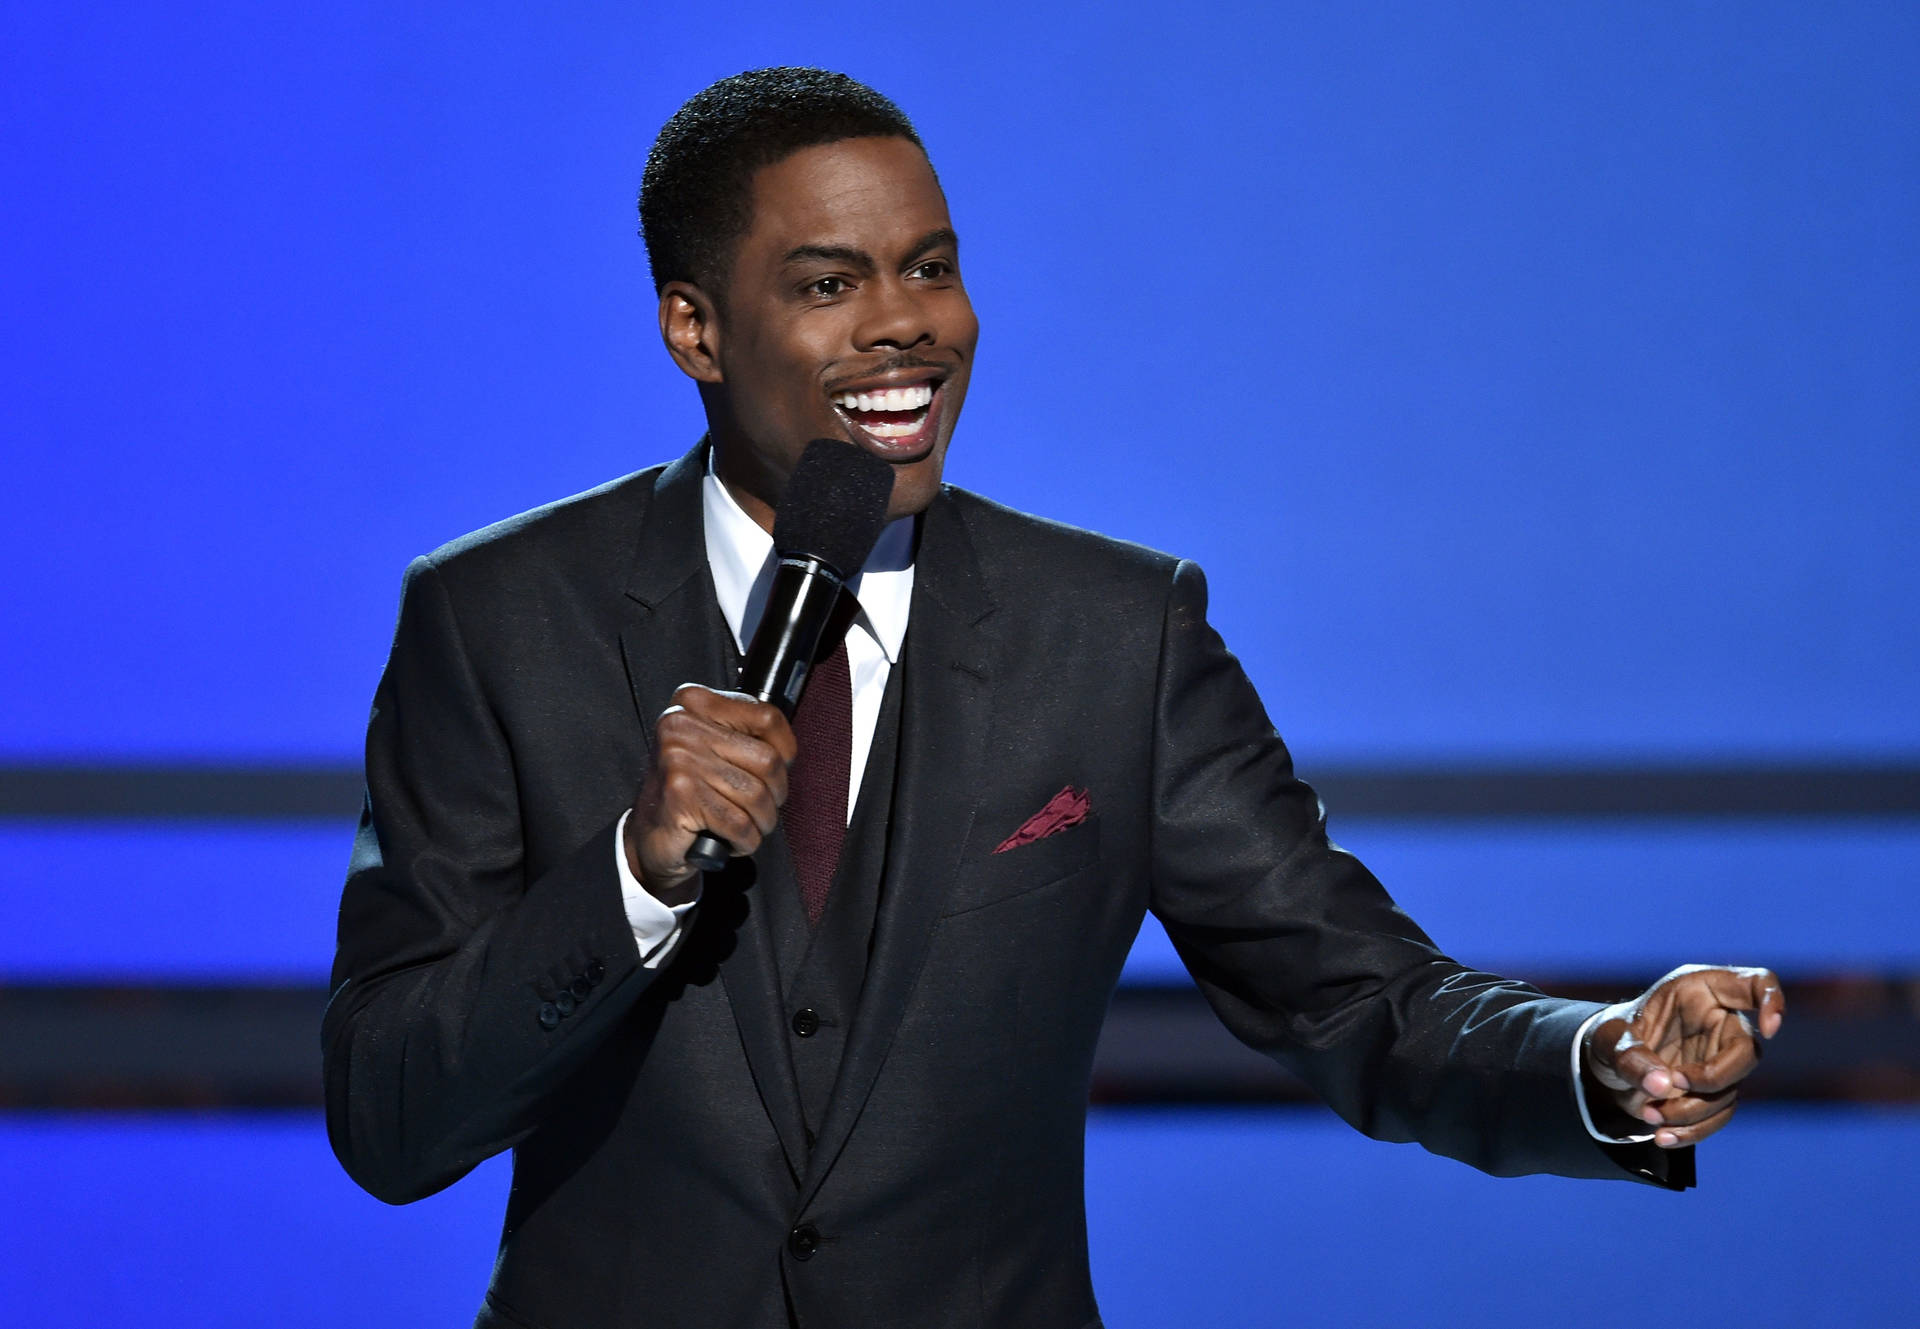 Chris Rock Delivering a Stand-Up Performance Wallpaper